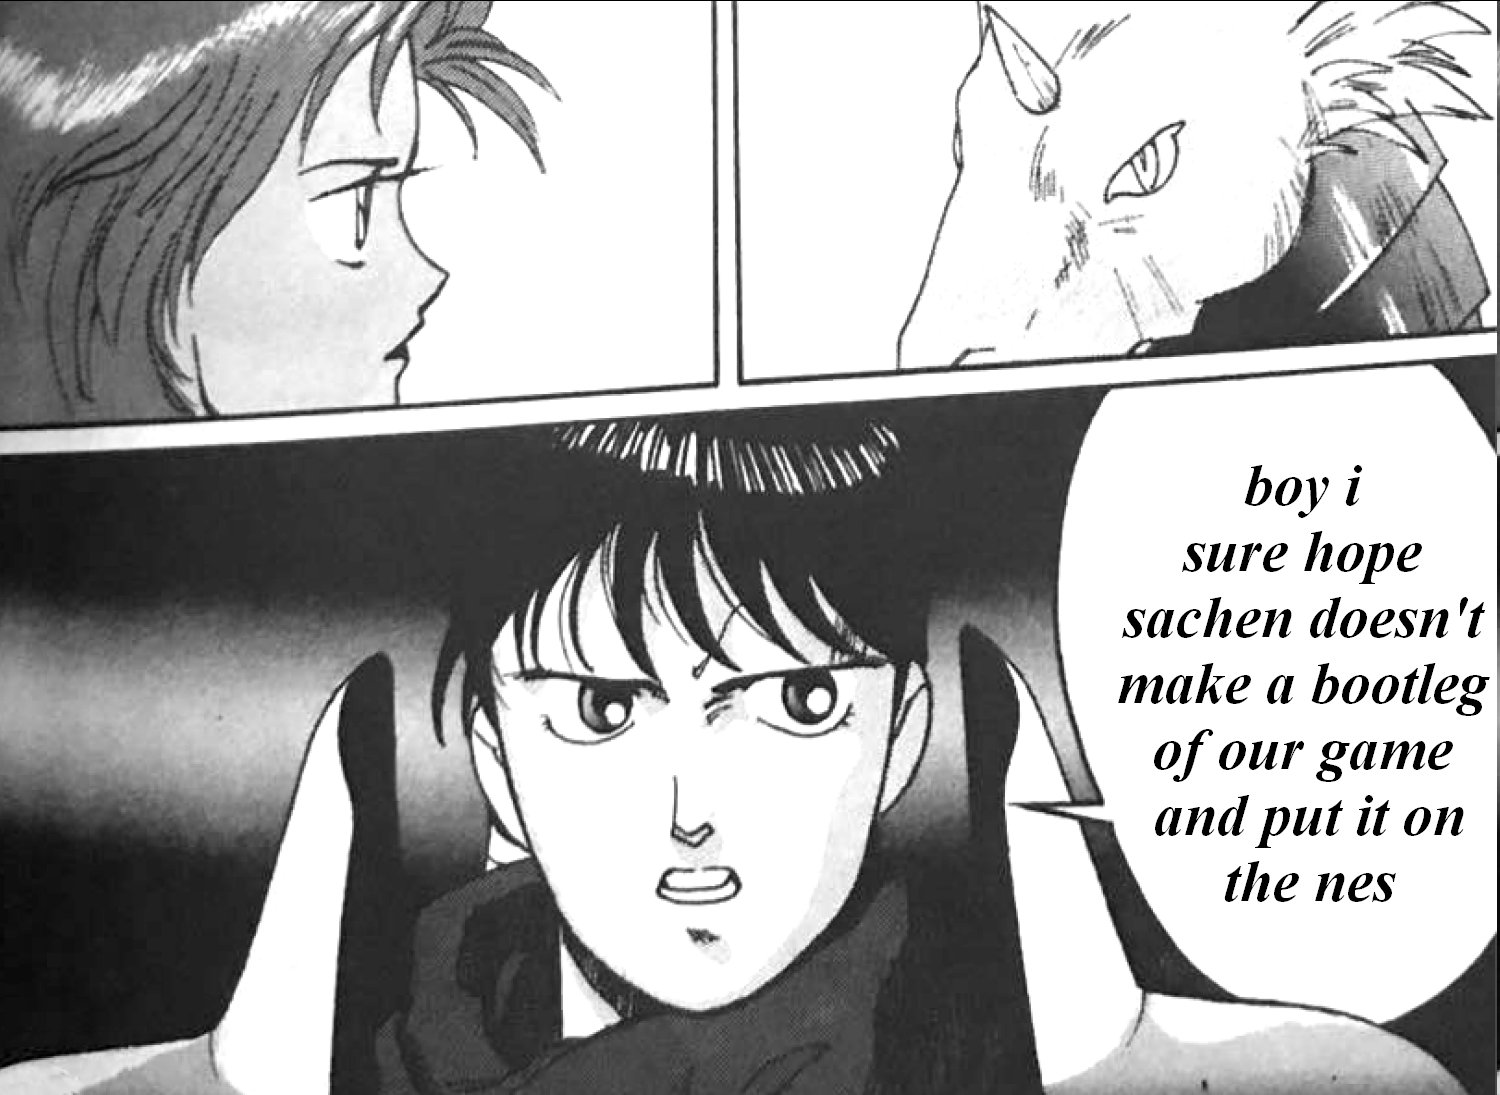 gaiapolis manga screenshot of elain (half fairy woman), galahad (lizard like-knight), and gerard (prince with long ponytail) looking intensely at each other. gerard's speech bubble reads: boy i sure hope sachen doesn't make a bootleg of our game and put it on the nes